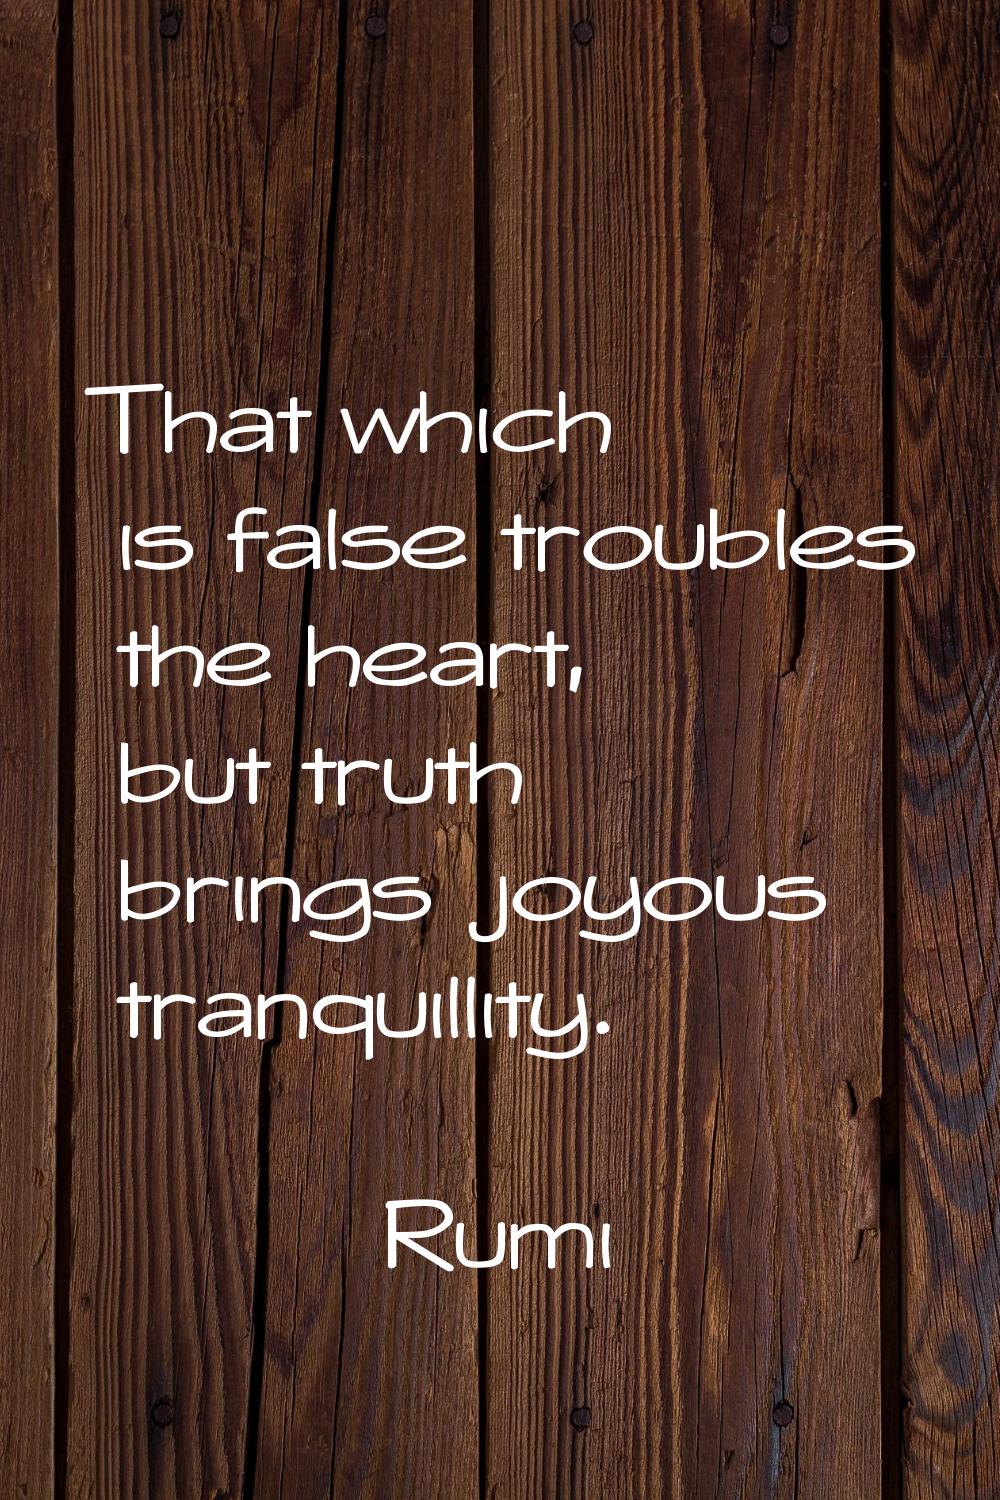 That which is false troubles the heart, but truth brings joyous tranquillity.